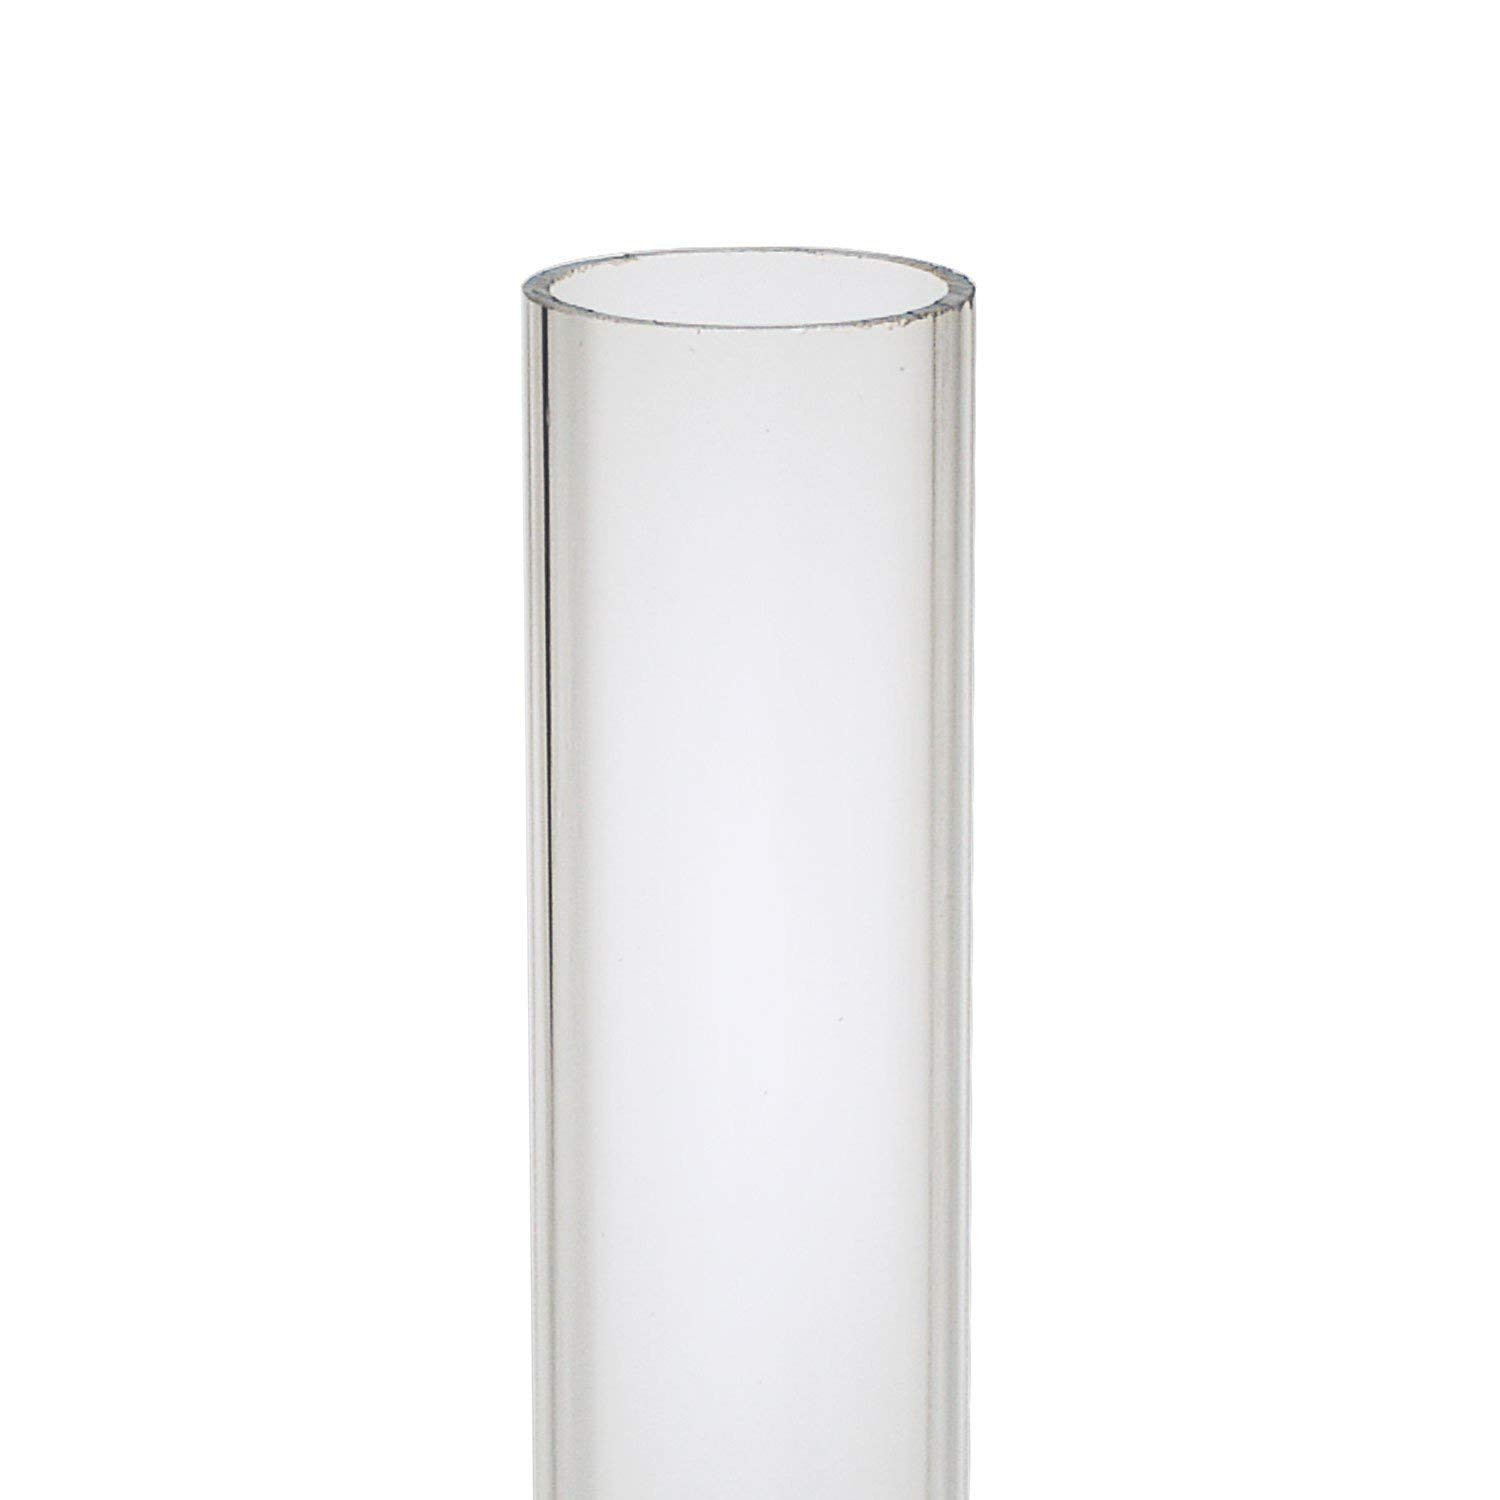 12 Elegant 16 Inch Cylinder Vases 2024 free download 16 inch cylinder vases of amazon com source one deluxe clear acrylic tube 2 inches thick 12 throughout amazon com source one deluxe clear acrylic tube 2 inches thick 12 inch 2 inch wide offi